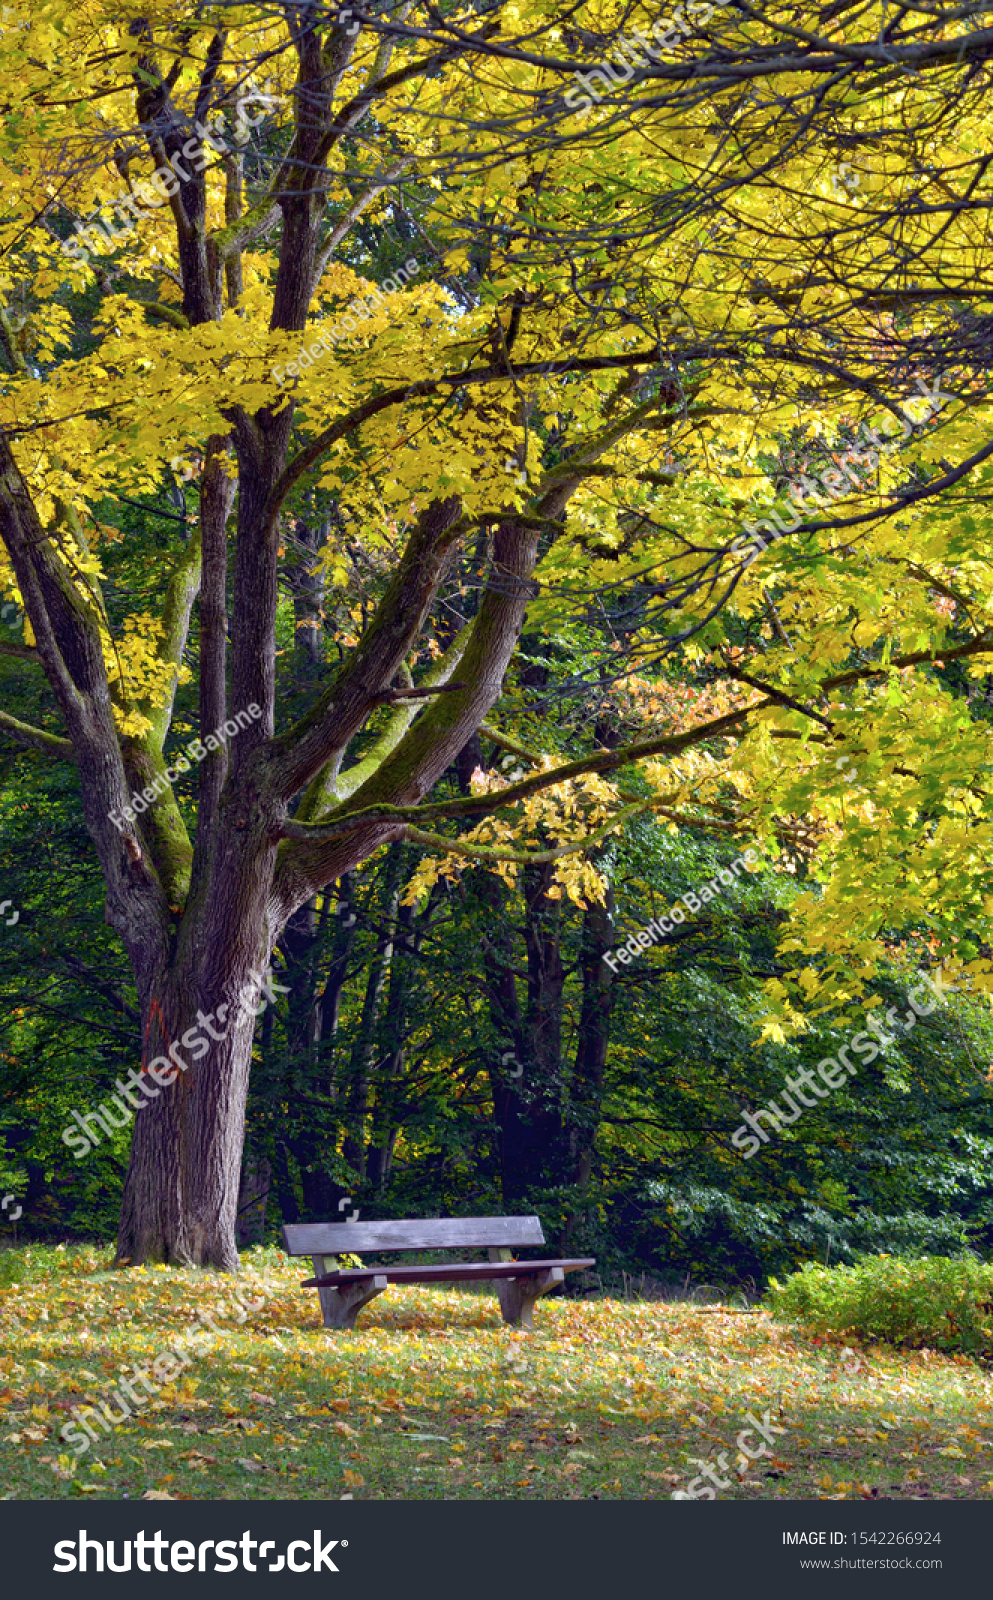 stock-photo-autumn-in-park-bench-with-ye